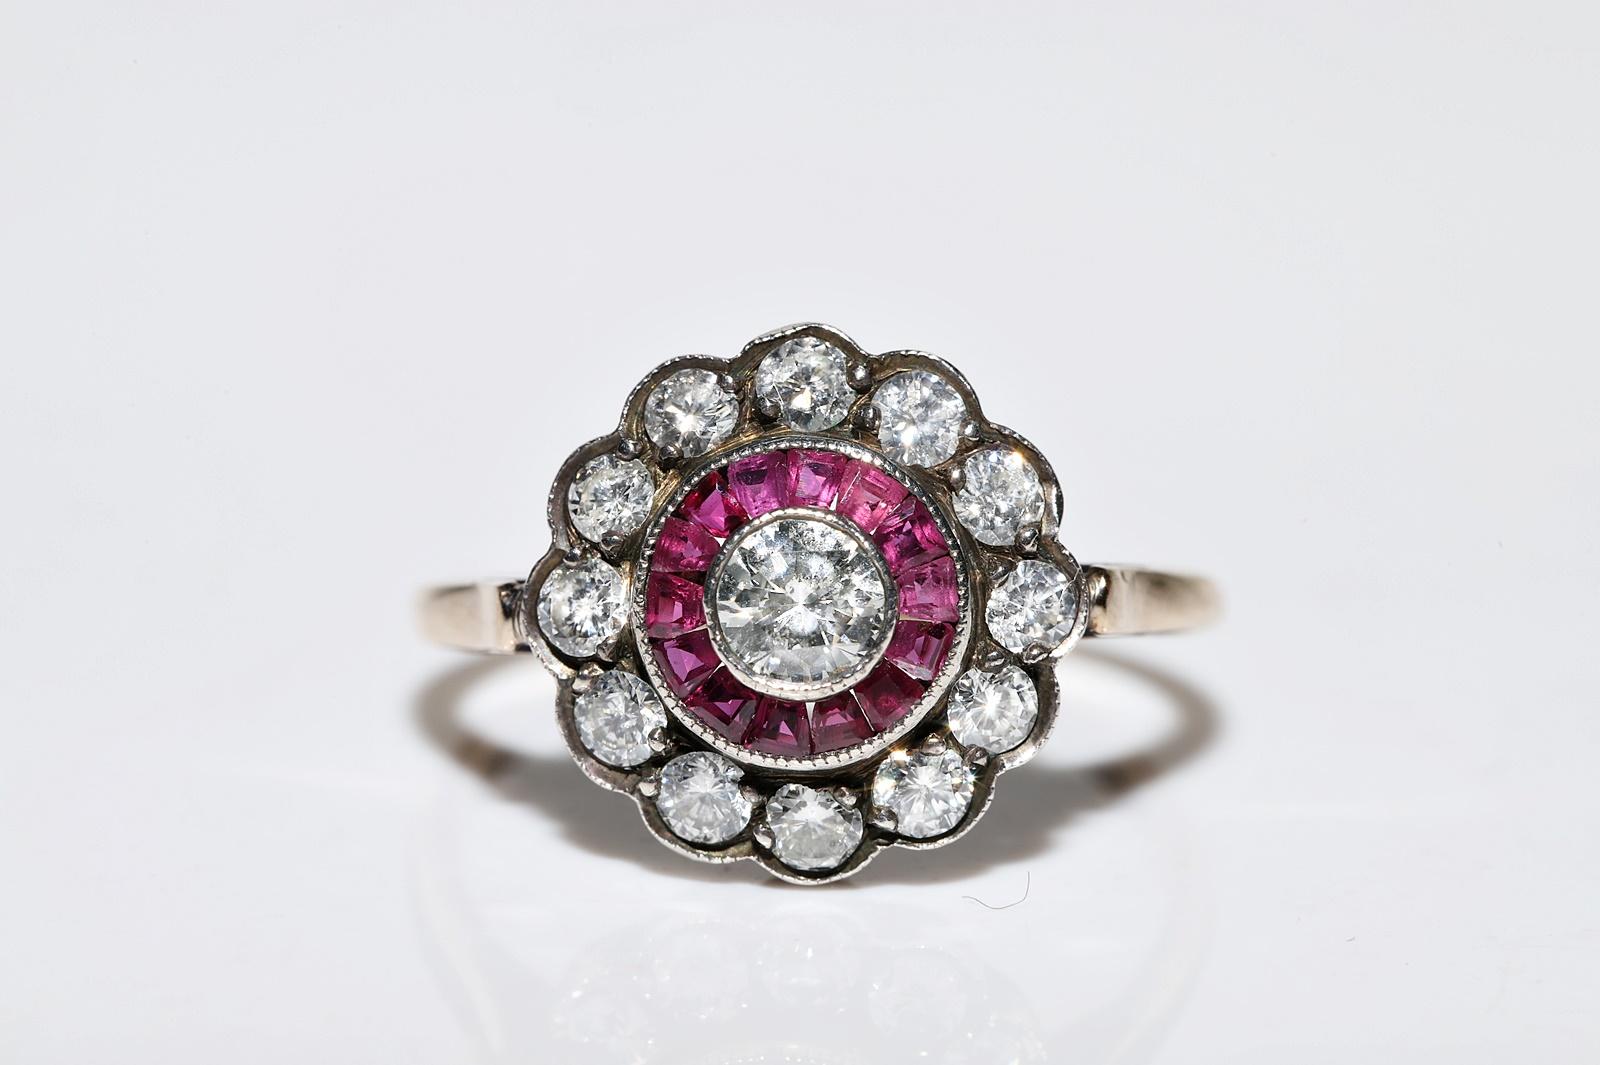 Brilliant Cut Old Original Vintage Circa 1980s 14k Gold Natural Diamond And Caliber Ruby Ring For Sale